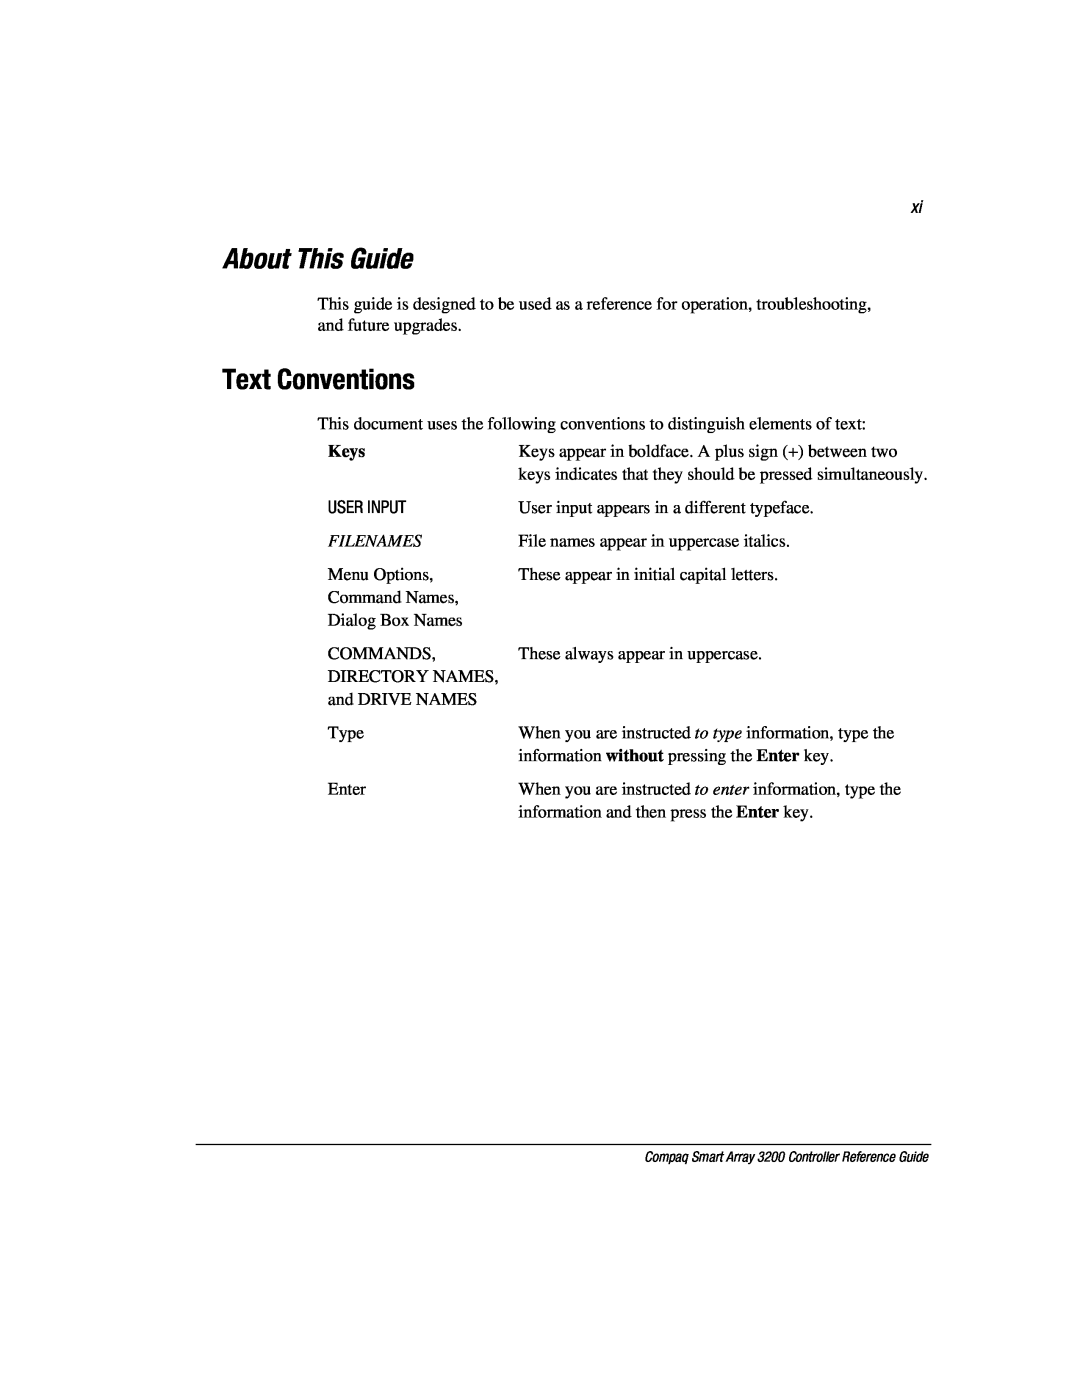 Compaq 3200 manual About This Guide, Text Conventions, Filenames 